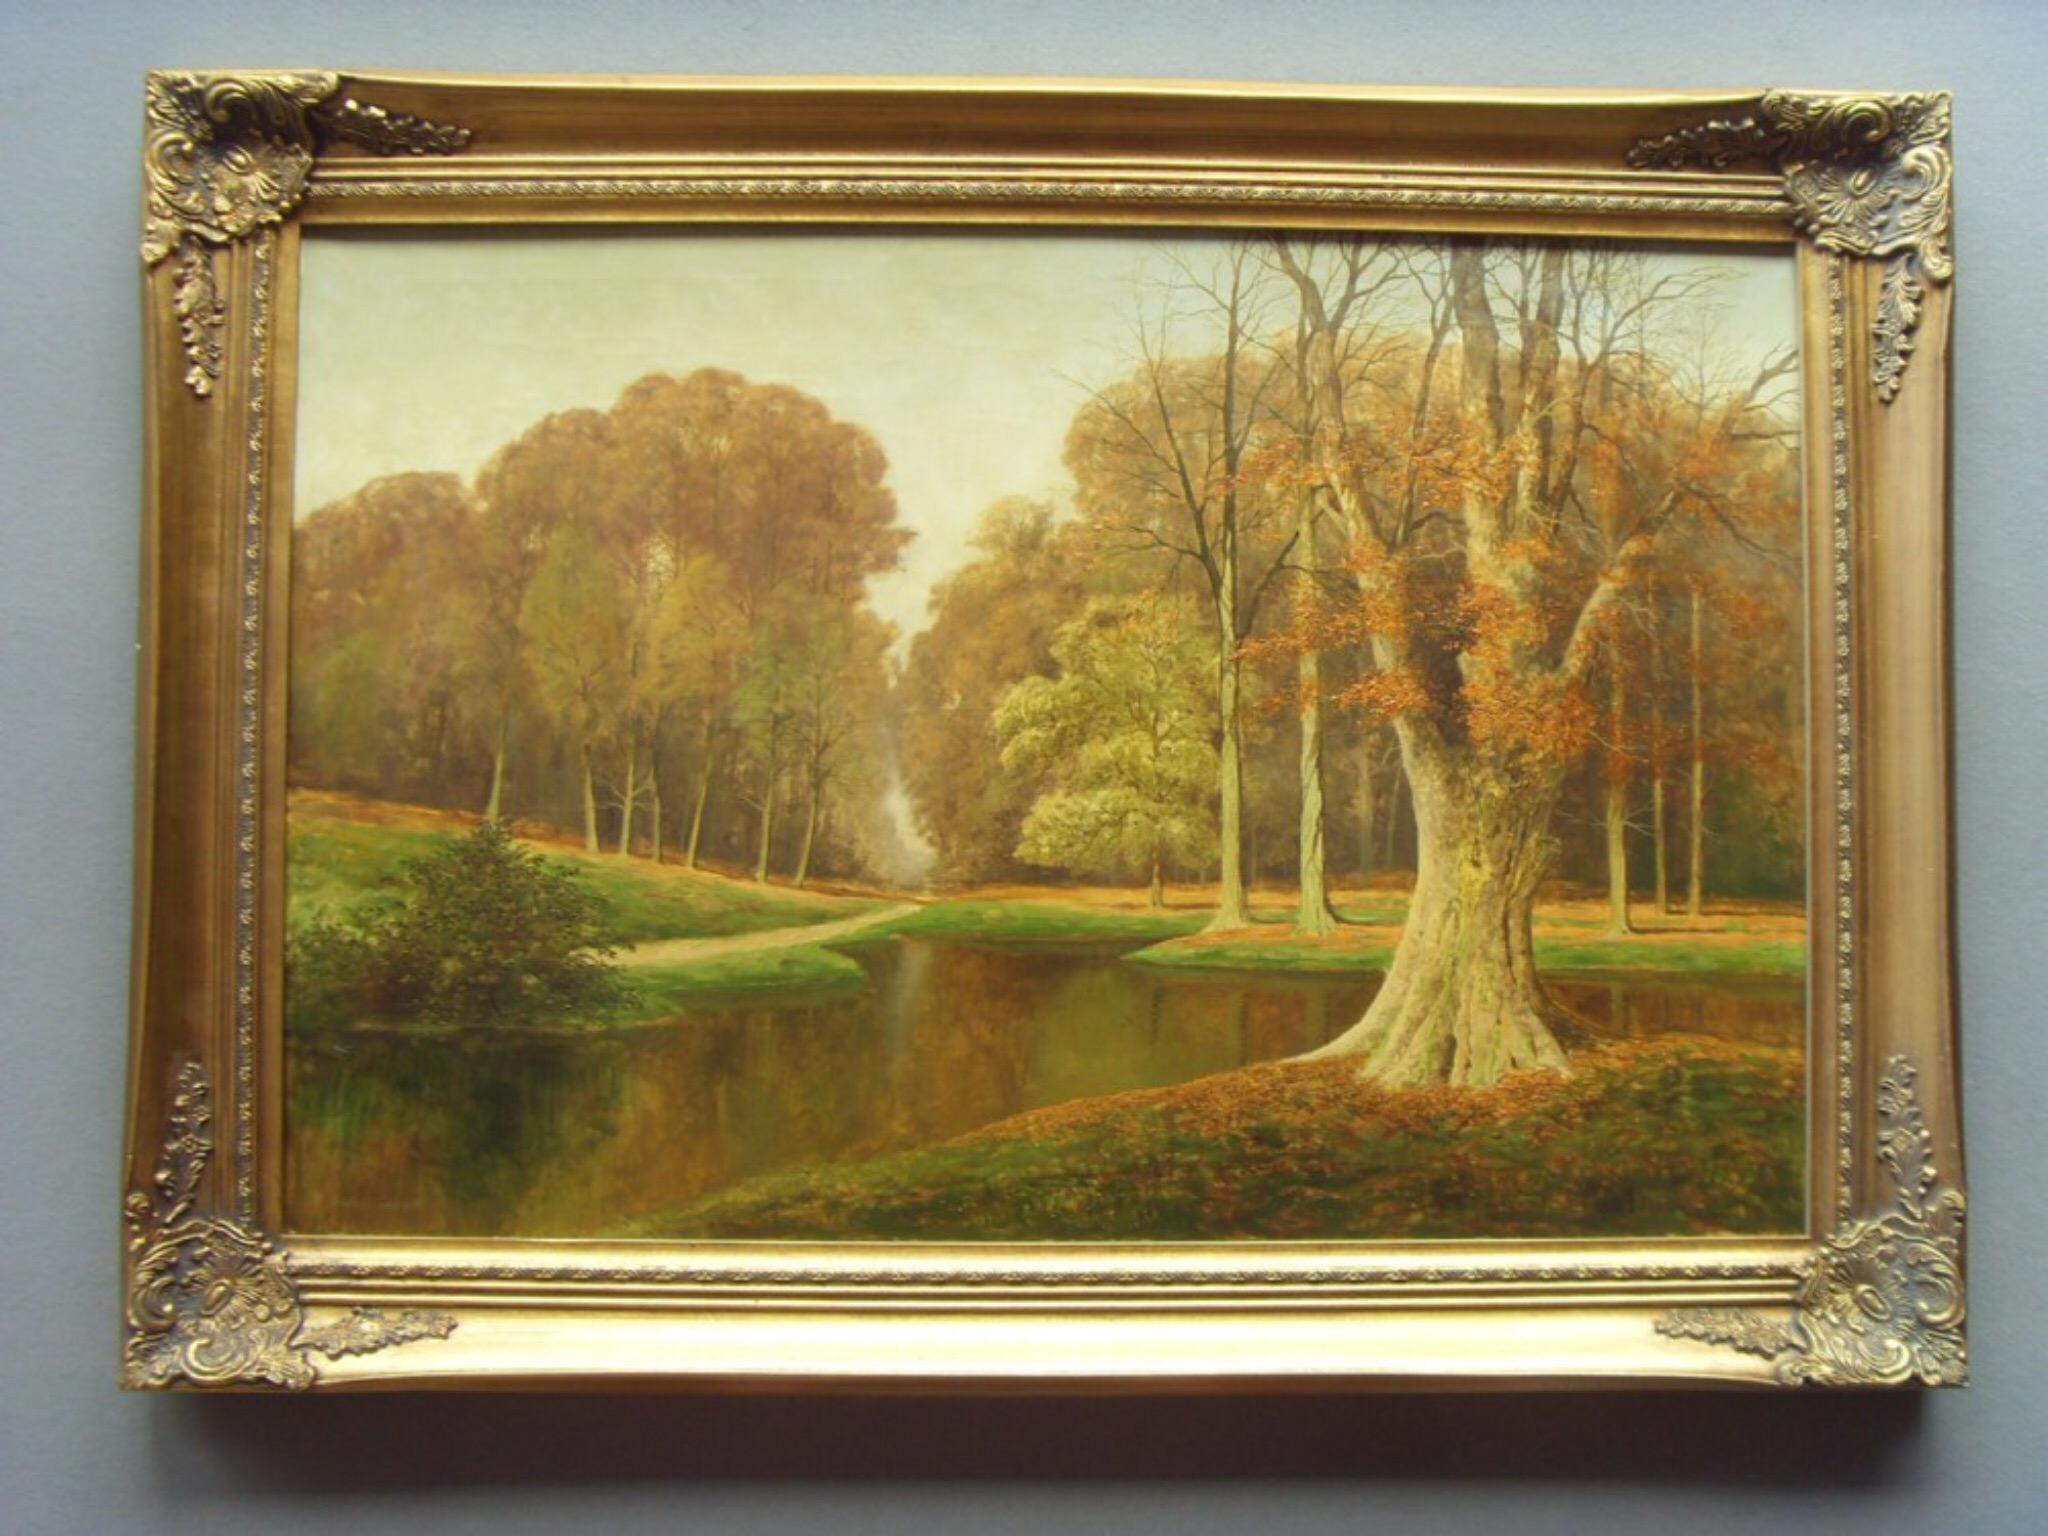 This is a fine large scale oil painting on canvas by the Kentish artist David Mead. 

The painting depicts a lavish green and brown autumnal view, with the majority of the trees wearing their autumn leaves, with a majestic oak in the right